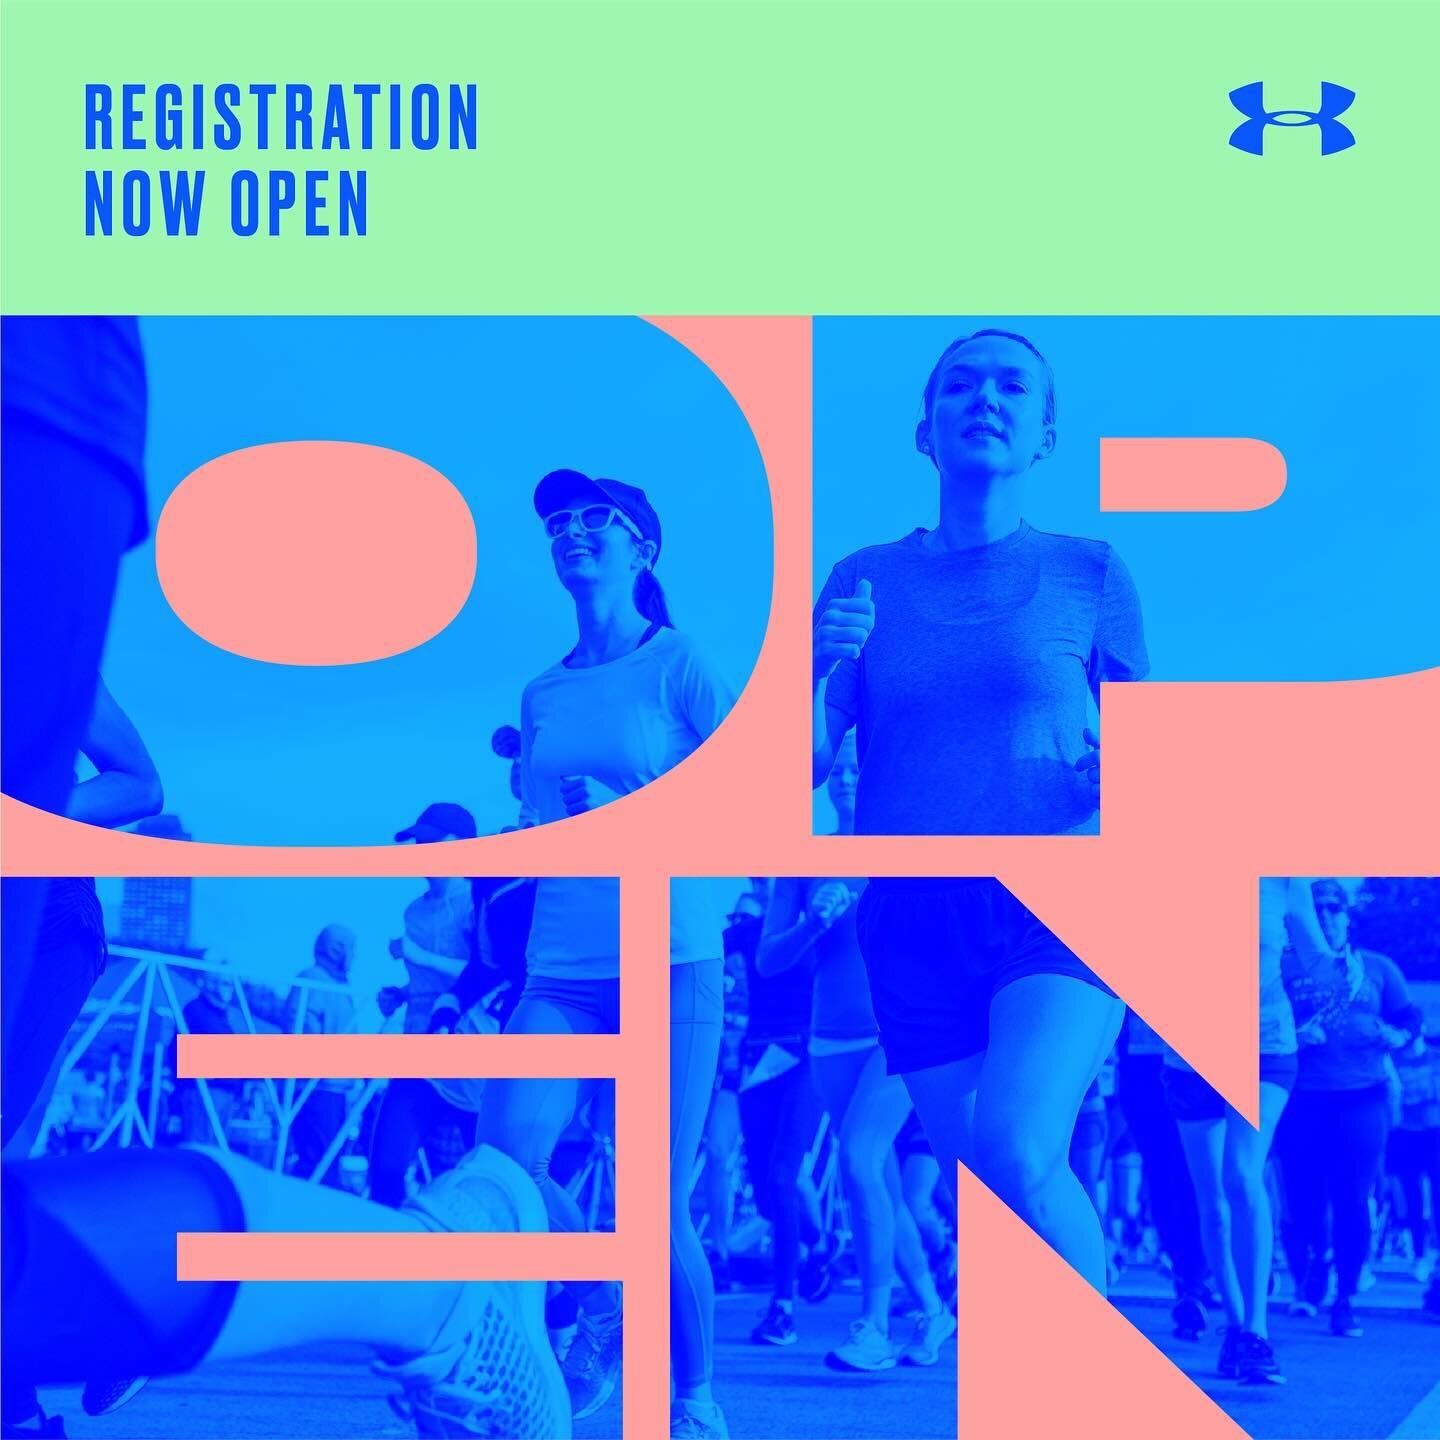 Join the party! 🎉 Registration is NOW OPEN for the 2024 @underarmour Women&rsquo;s Run. #womensrun

Date: Saturday, June 1st 
Location: Grant Park | Chicago, IL 

Entries will be accepted on a first come, first served basis. Once sold out, we are un